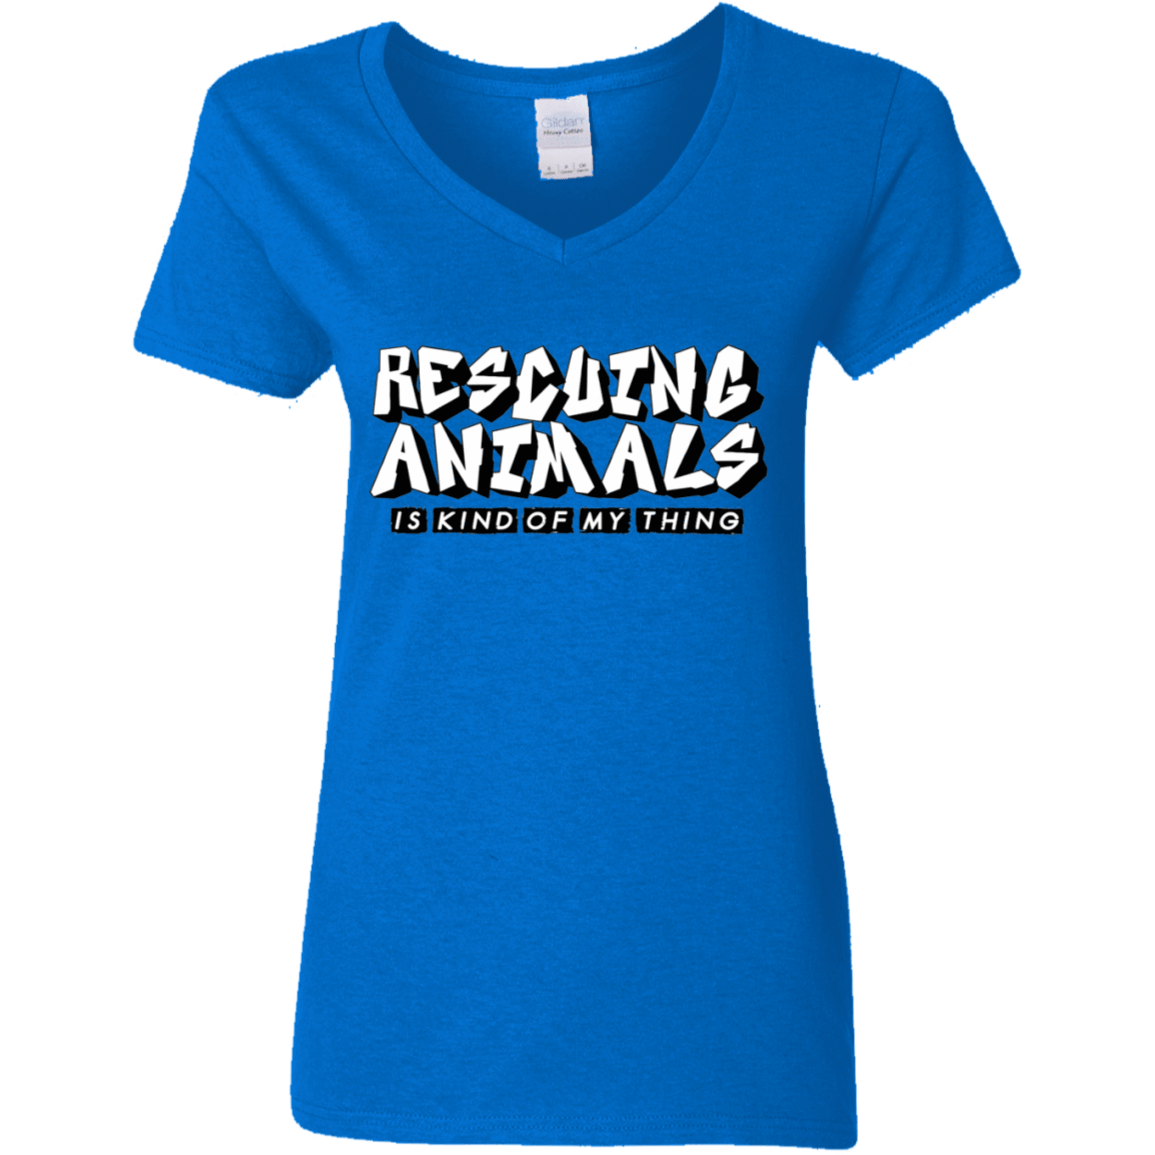 Rescuing Animals is My Kind Of Thing - Ladies V Neck.